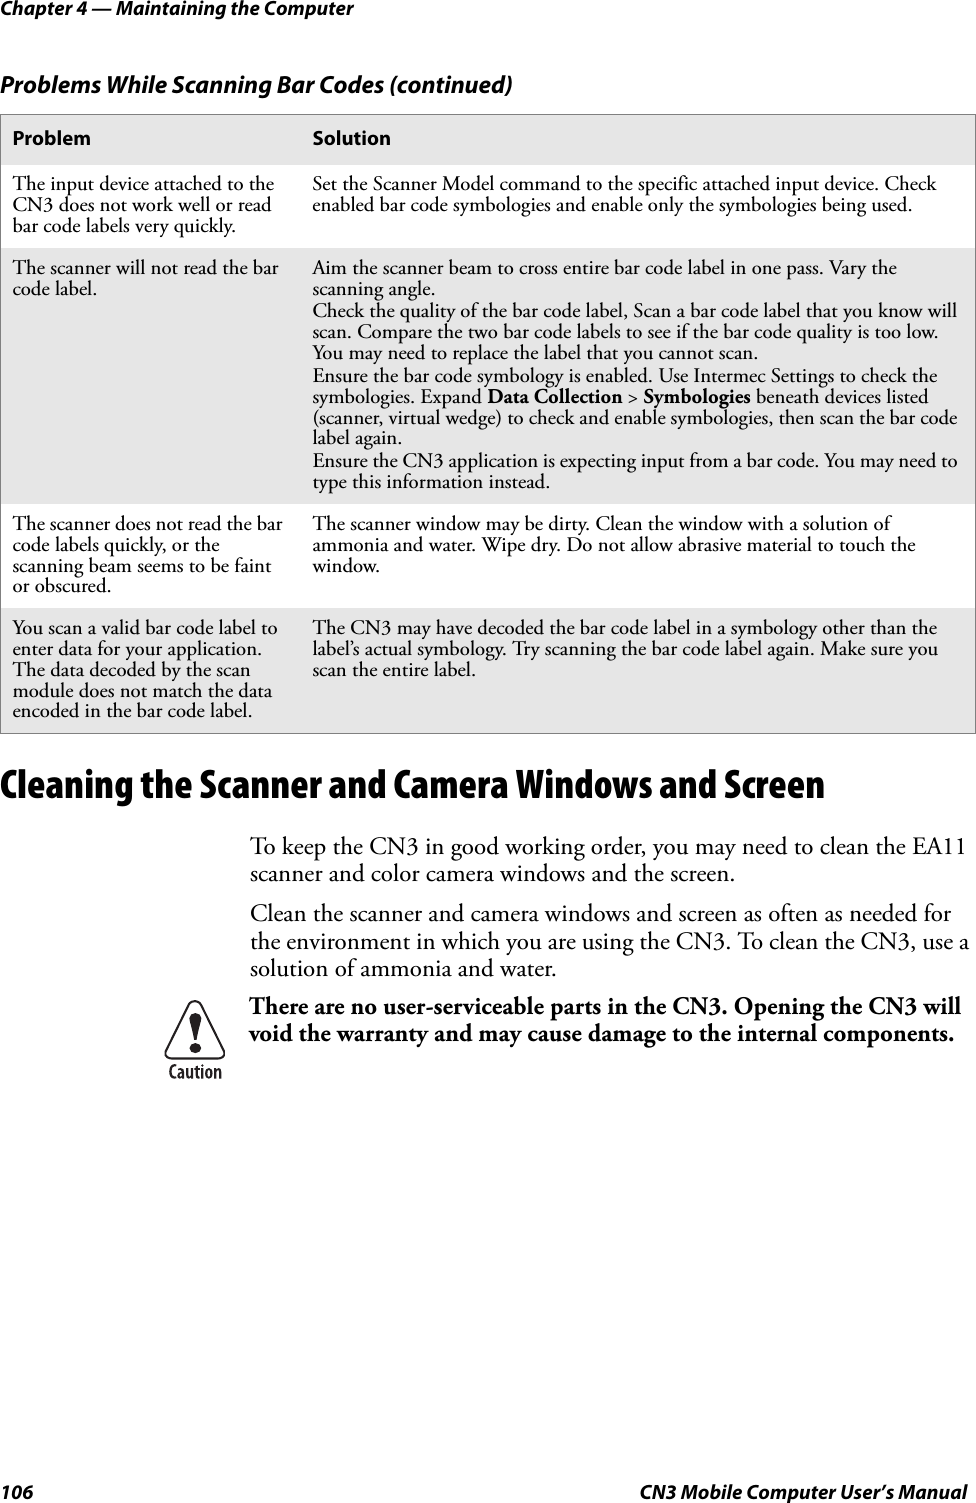 Chapter 4 — Maintaining the Computer106 CN3 Mobile Computer User’s ManualCleaning the Scanner and Camera Windows and ScreenTo keep the CN3 in good working order, you may need to clean the EA11 scanner and color camera windows and the screen.Clean the scanner and camera windows and screen as often as needed for the environment in which you are using the CN3. To clean the CN3, use a solution of ammonia and water.The input device attached to the CN3 does not work well or read bar code labels very quickly.Set the Scanner Model command to the specific attached input device. Check enabled bar code symbologies and enable only the symbologies being used.The scanner will not read the bar code label.Aim the scanner beam to cross entire bar code label in one pass. Vary the scanning angle.Check the quality of the bar code label, Scan a bar code label that you know will scan. Compare the two bar code labels to see if the bar code quality is too low. You may need to replace the label that you cannot scan.Ensure the bar code symbology is enabled. Use Intermec Settings to check the symbologies. Expand Data Collection &gt; Symbologies beneath devices listed (scanner, virtual wedge) to check and enable symbologies, then scan the bar code label again.Ensure the CN3 application is expecting input from a bar code. You may need to type this information instead.The scanner does not read the bar code labels quickly, or the scanning beam seems to be faint or obscured.The scanner window may be dirty. Clean the window with a solution of ammonia and water. Wipe dry. Do not allow abrasive material to touch the window.You scan a valid bar code label to enter data for your application. The data decoded by the scan module does not match the data encoded in the bar code label.The CN3 may have decoded the bar code label in a symbology other than the label’s actual symbology. Try scanning the bar code label again. Make sure you scan the entire label.There are no user-serviceable parts in the CN3. Opening the CN3 will void the warranty and may cause damage to the internal components.Problems While Scanning Bar Codes (continued)Problem Solution